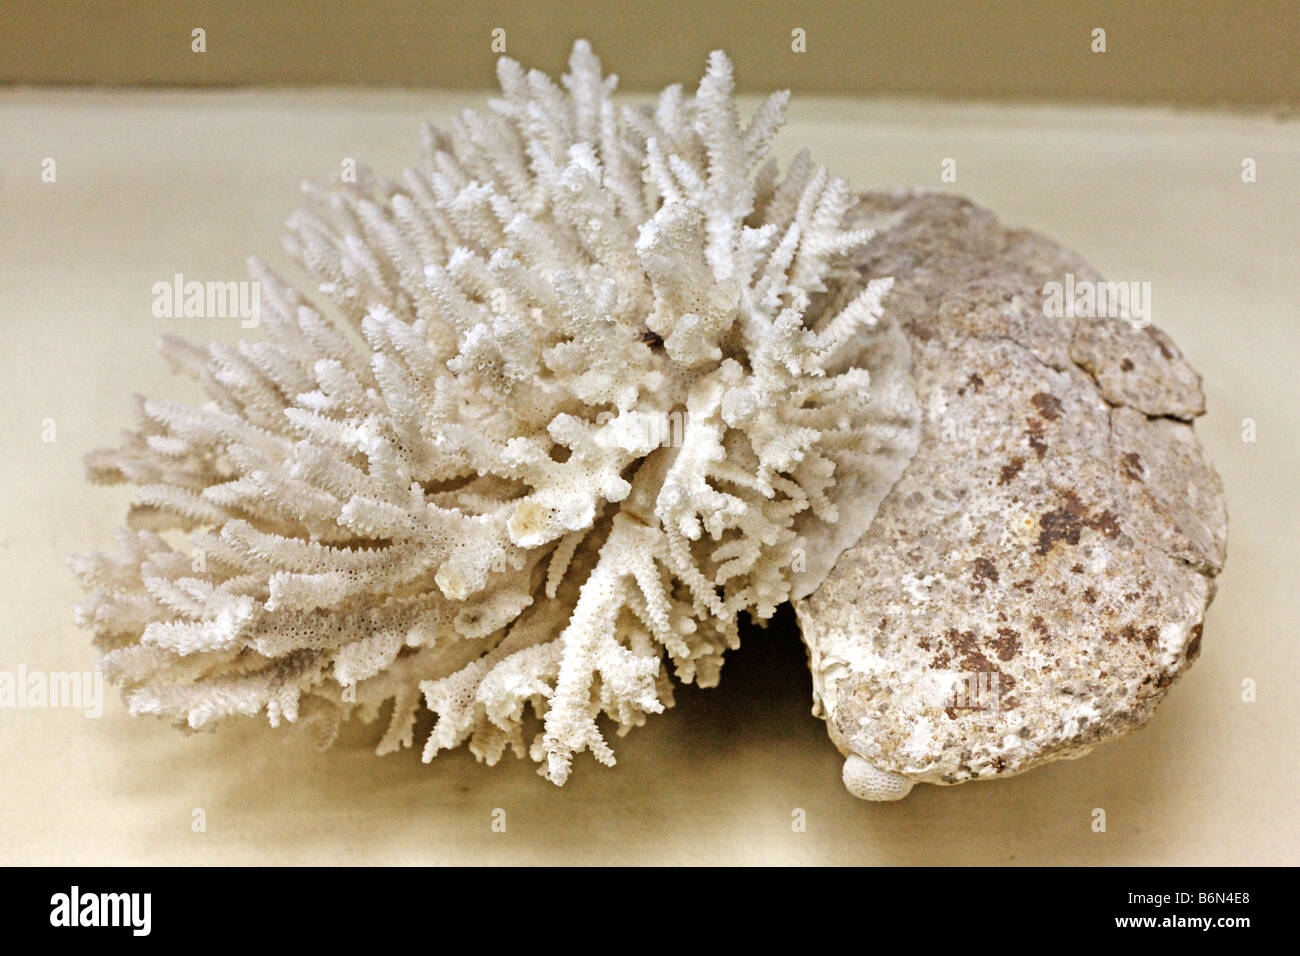 Acropora sp., palaeontology museum, Moscow, Russia Stock Photo